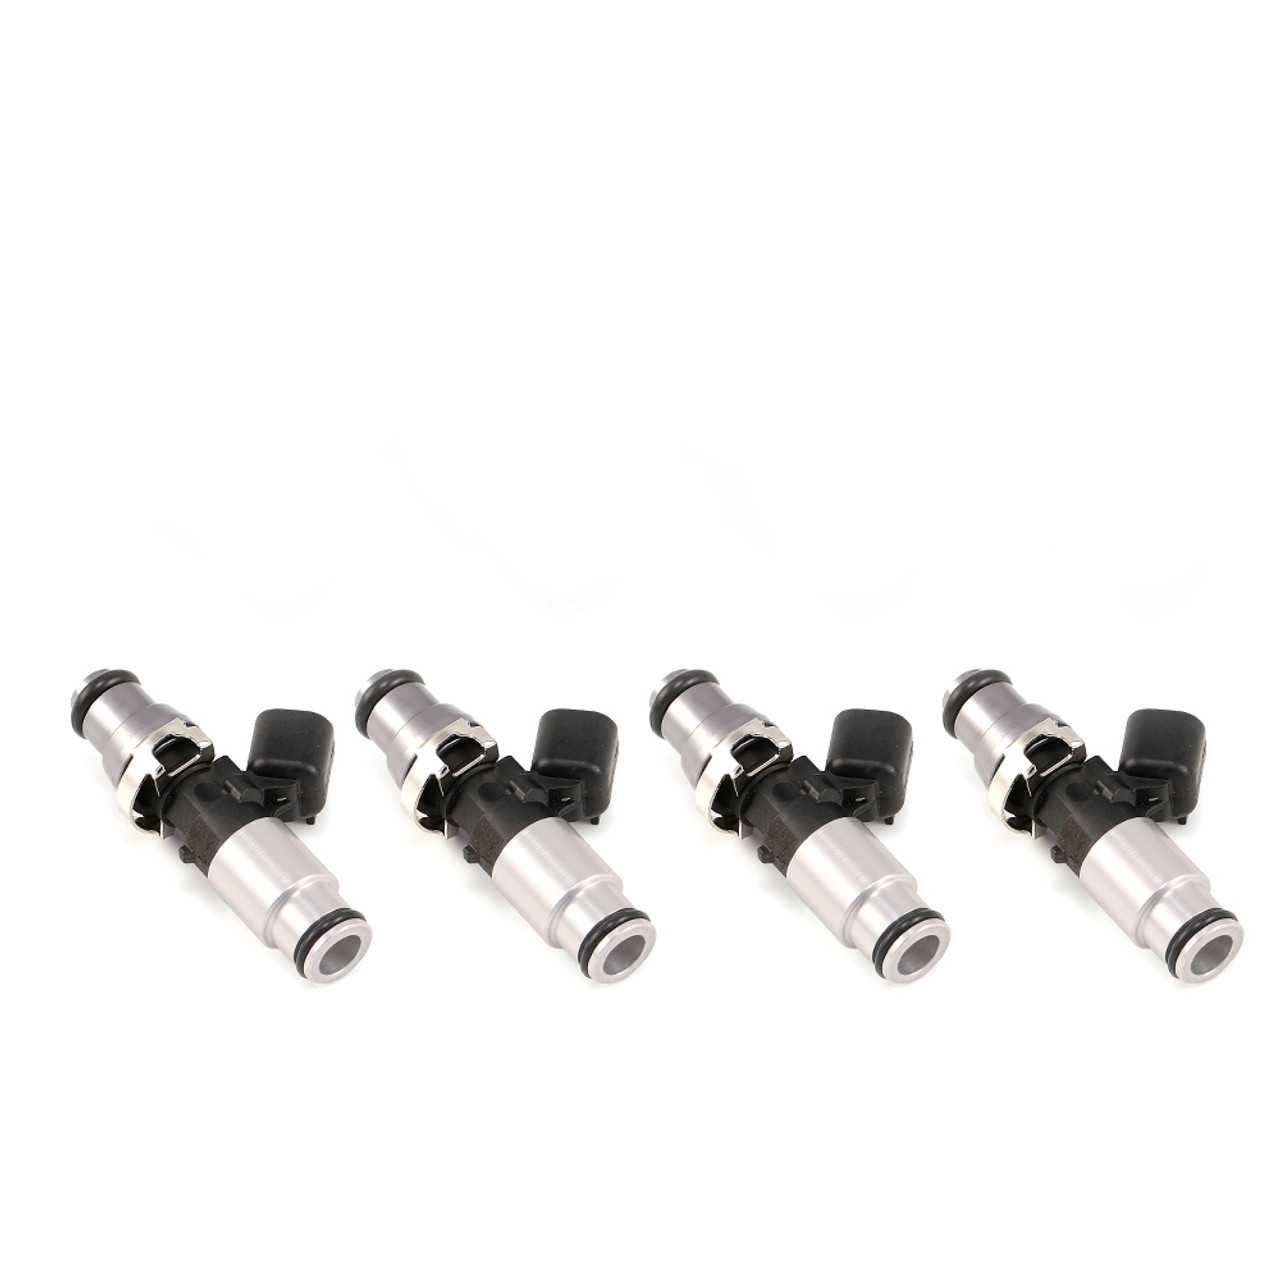 ID2600-XDS 2600.60.14.14B.4 Fuel Injectors, 14mm (grey) adapter top and (silver) bottom adapter, set of 4